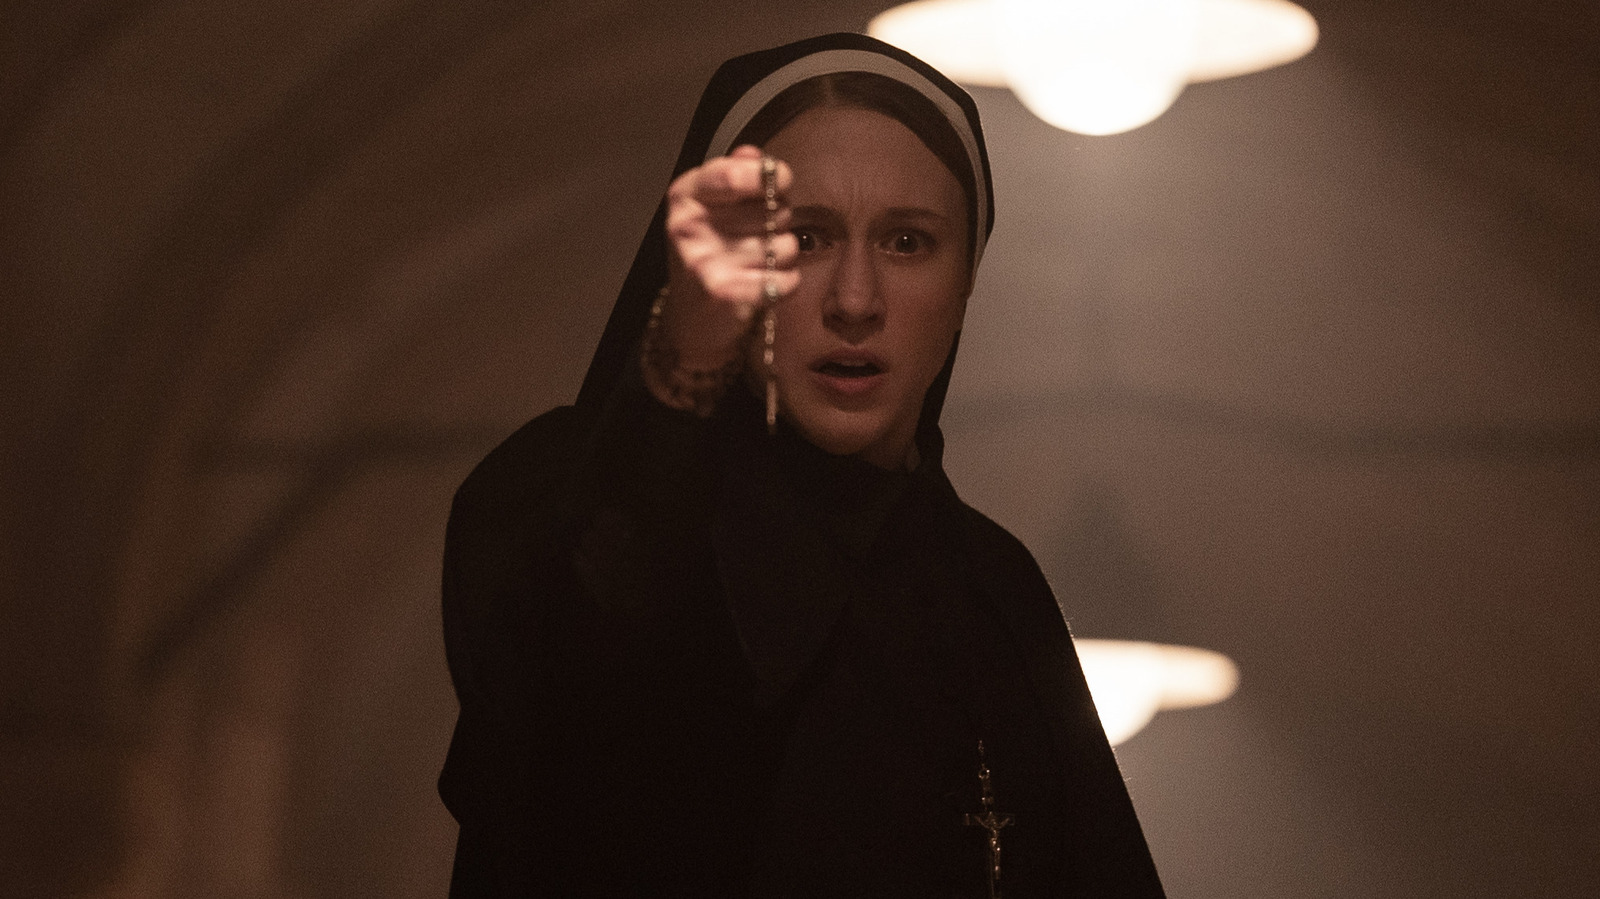 The Nun 2 Release Date Cast Trailer Plot And More Details